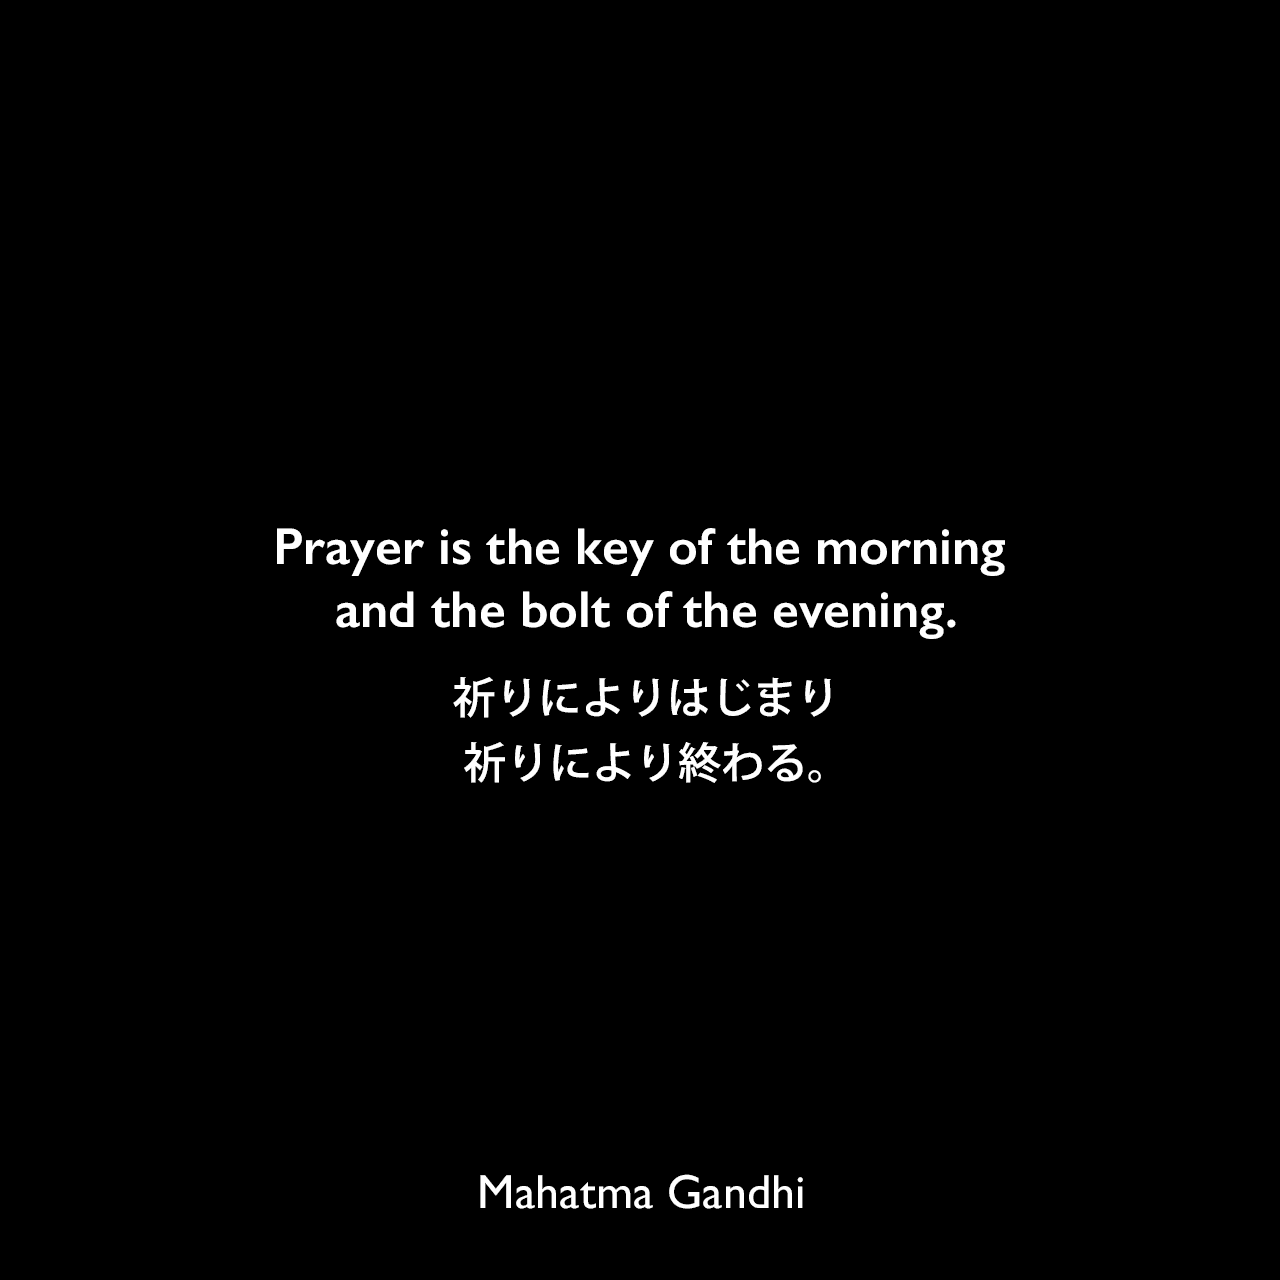 Prayer is the key of the morning and the bolt of the evening.祈りによりはじまり、祈りにより終わる。Mahatma Gandhi